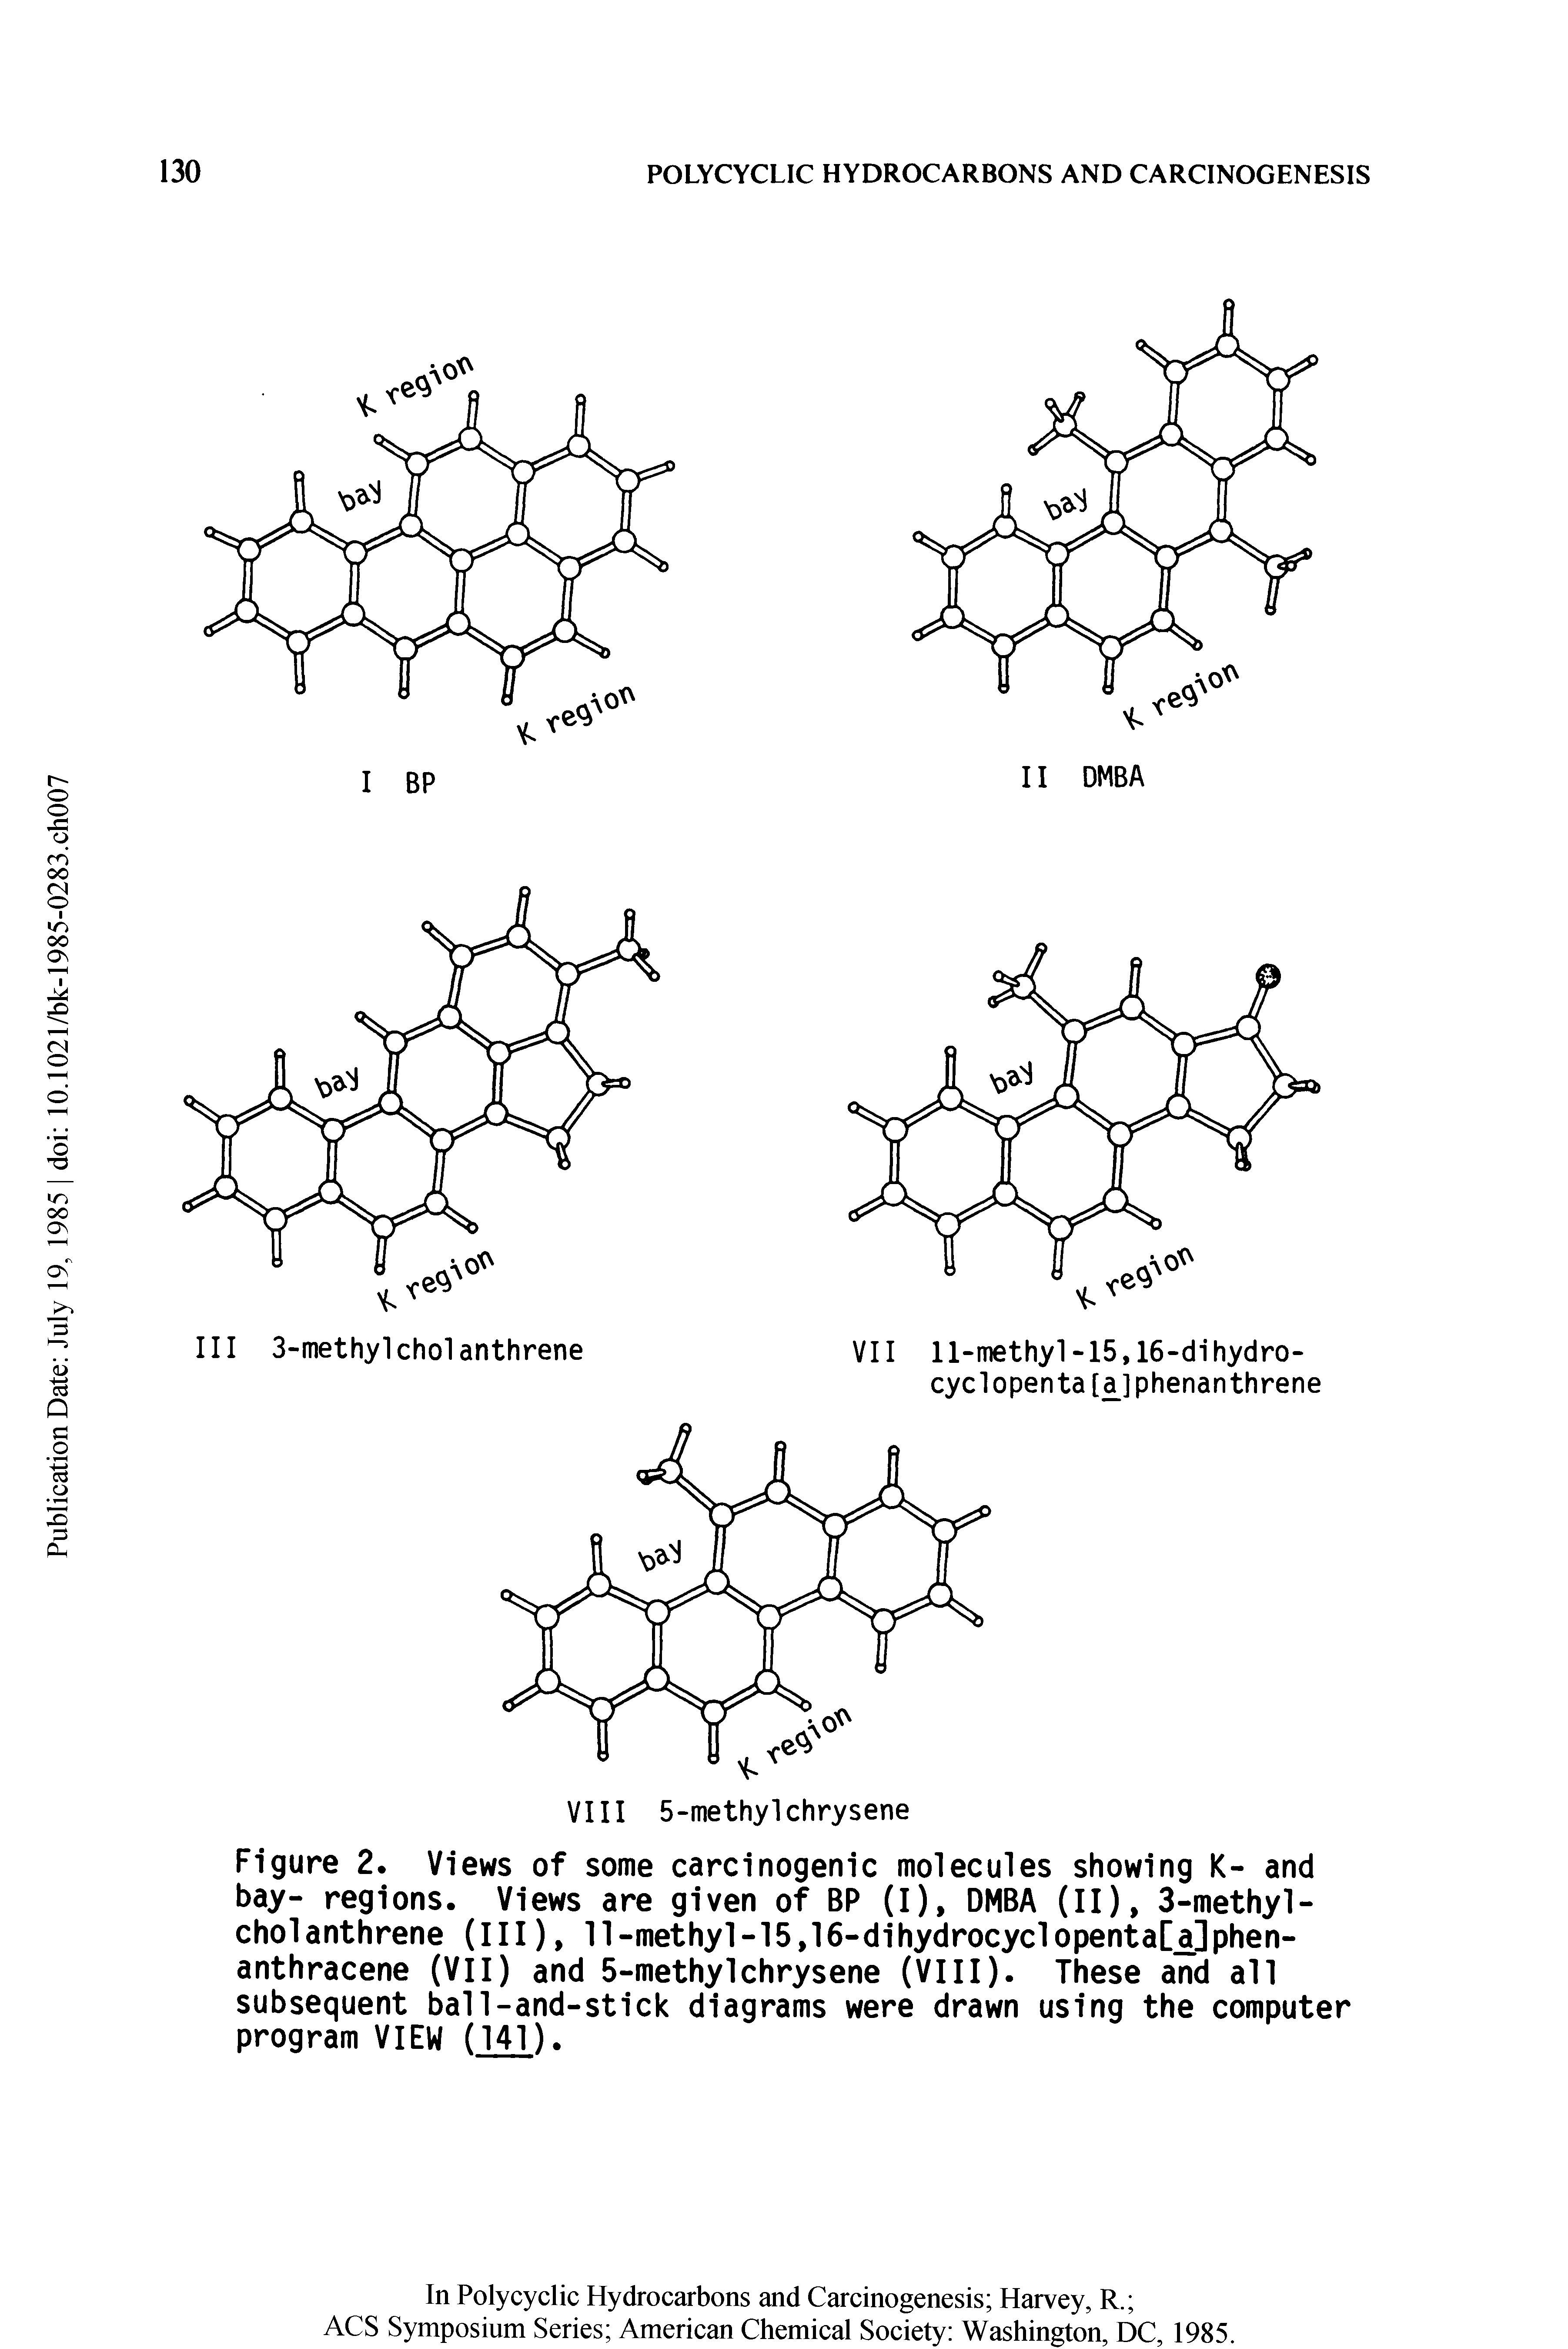 Figure 2. Views of some carcinogenic molecules showing K- and bay- regions. Views are given of BP (I), DMBA (II), 3-methyl-cholanthrene (III), ll-methyl-15,16-dihydrocyclopenta[a]phen-anthracene (VII) and 5-methylchrysene (VIII). These and all subsequent ball-and-stick diagrams were drawn using the computer program VIEW (141).